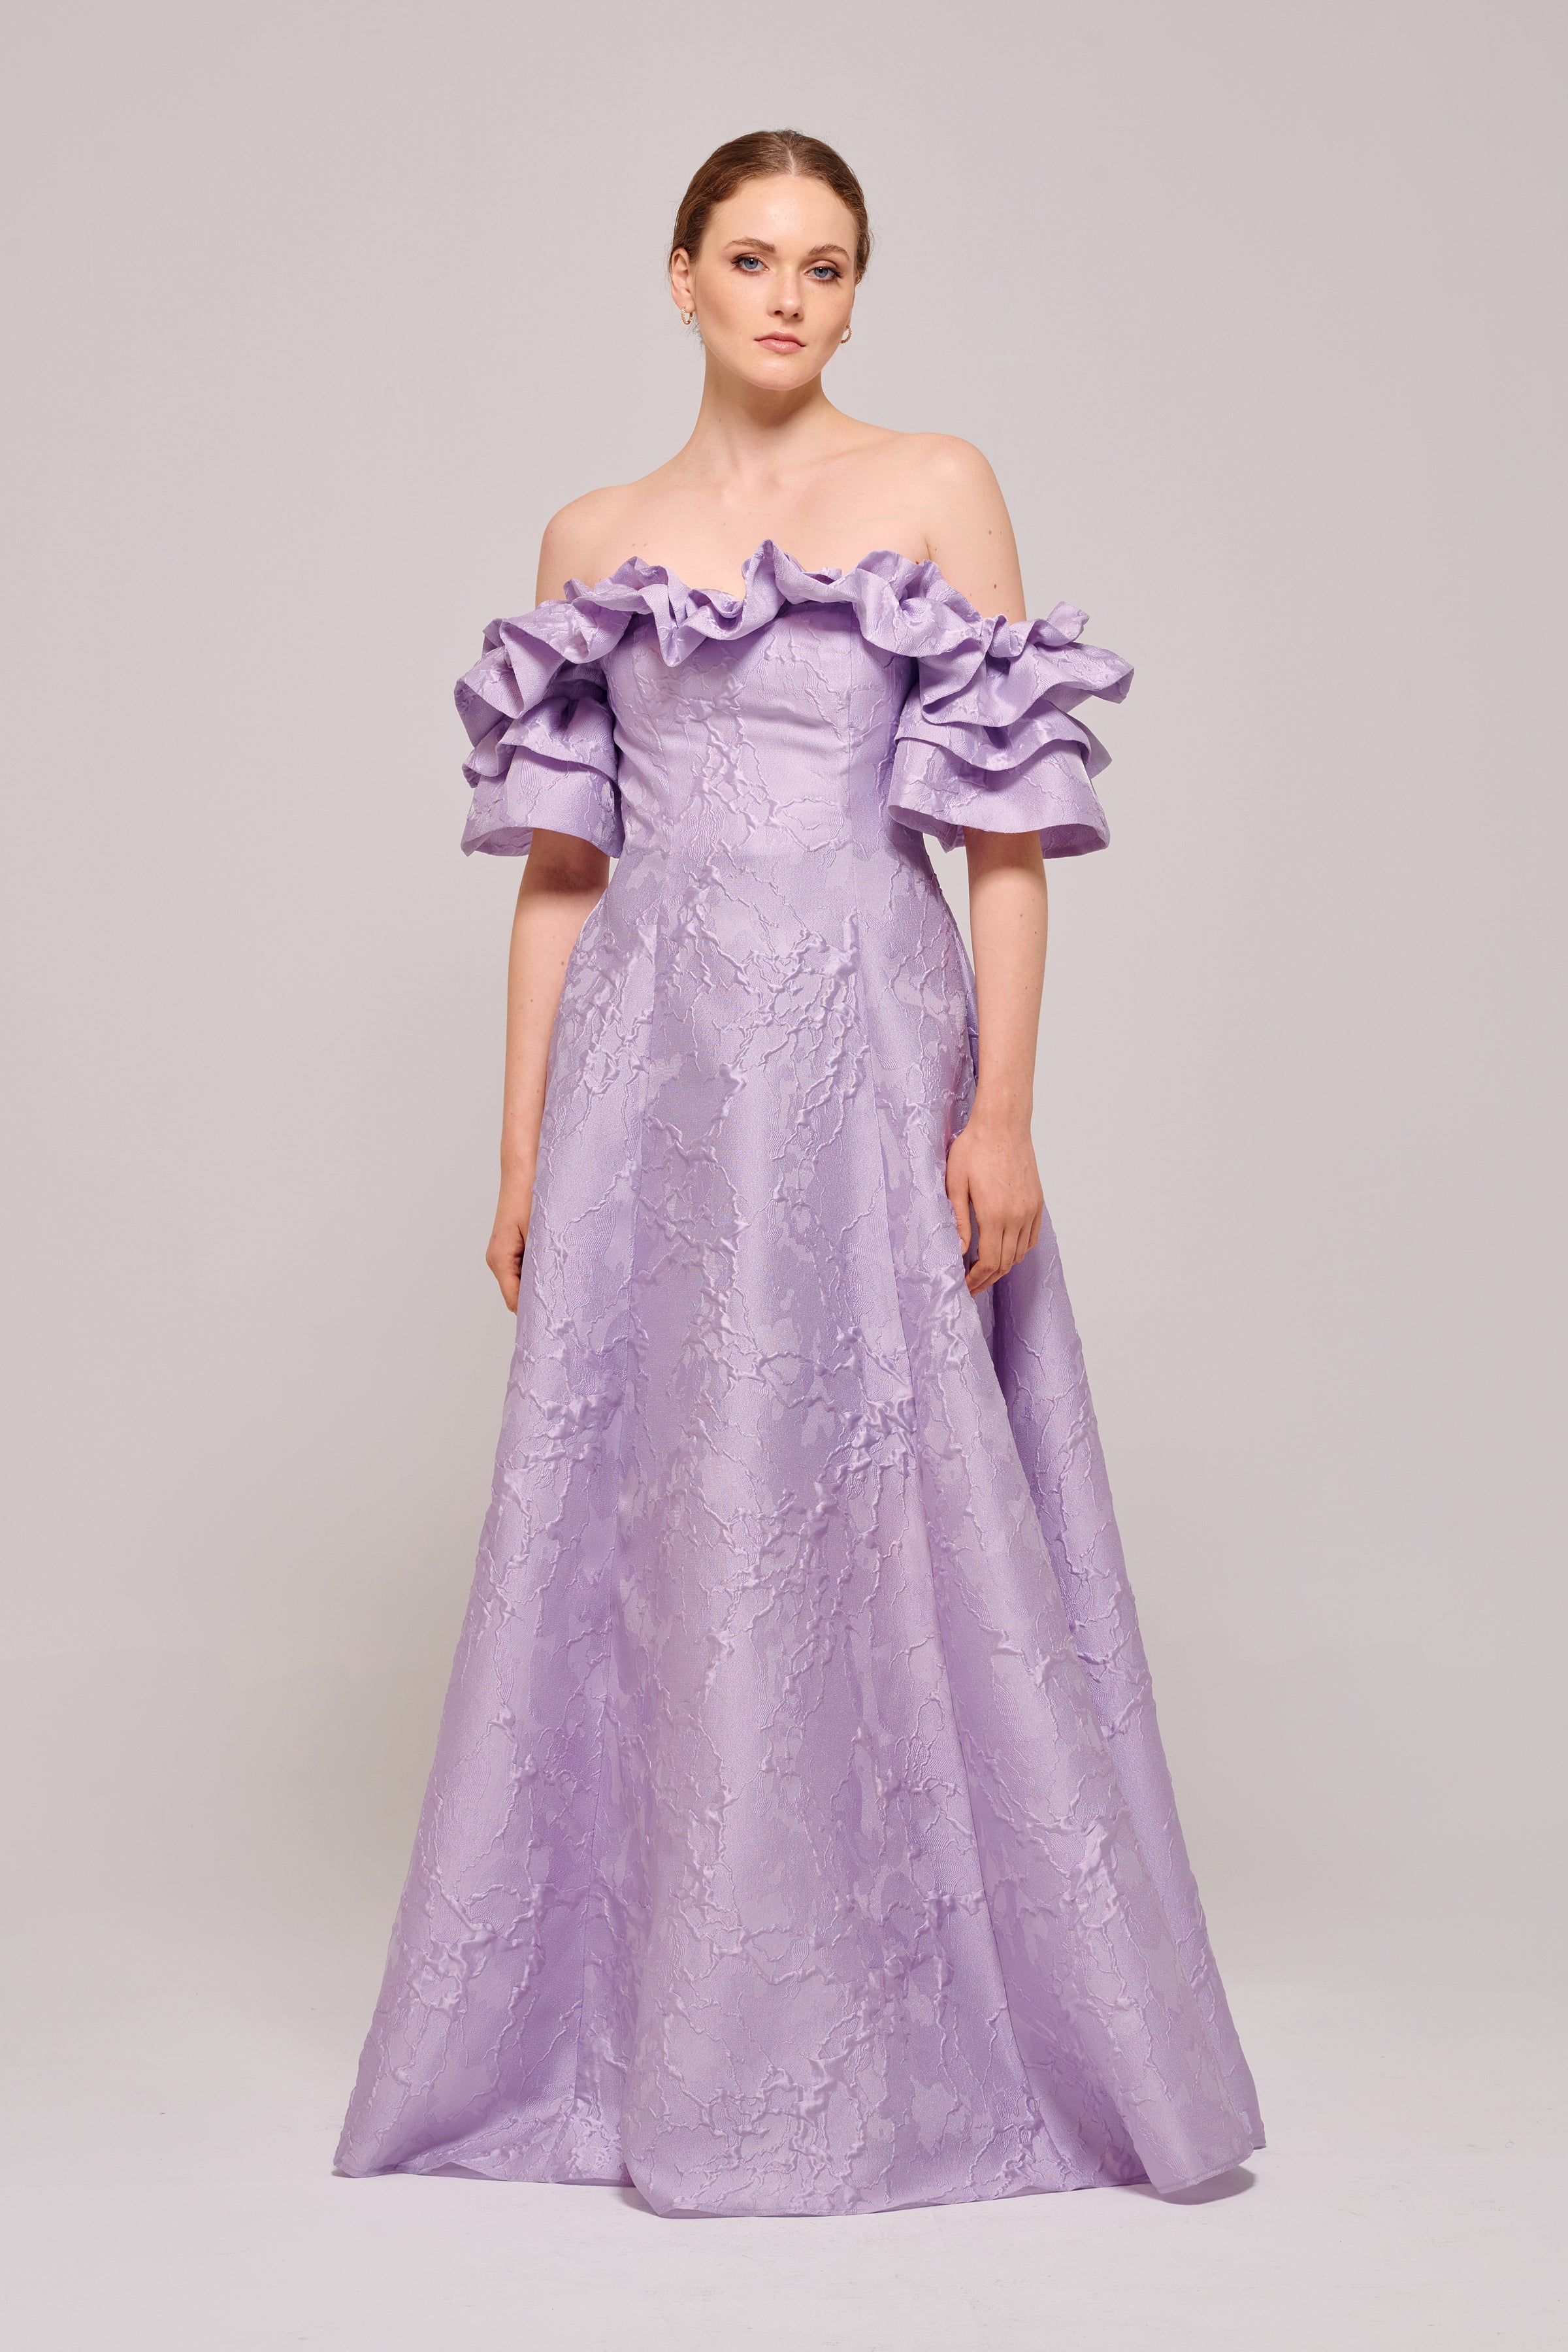 Ruffled Sleeve Long Lilac Gown